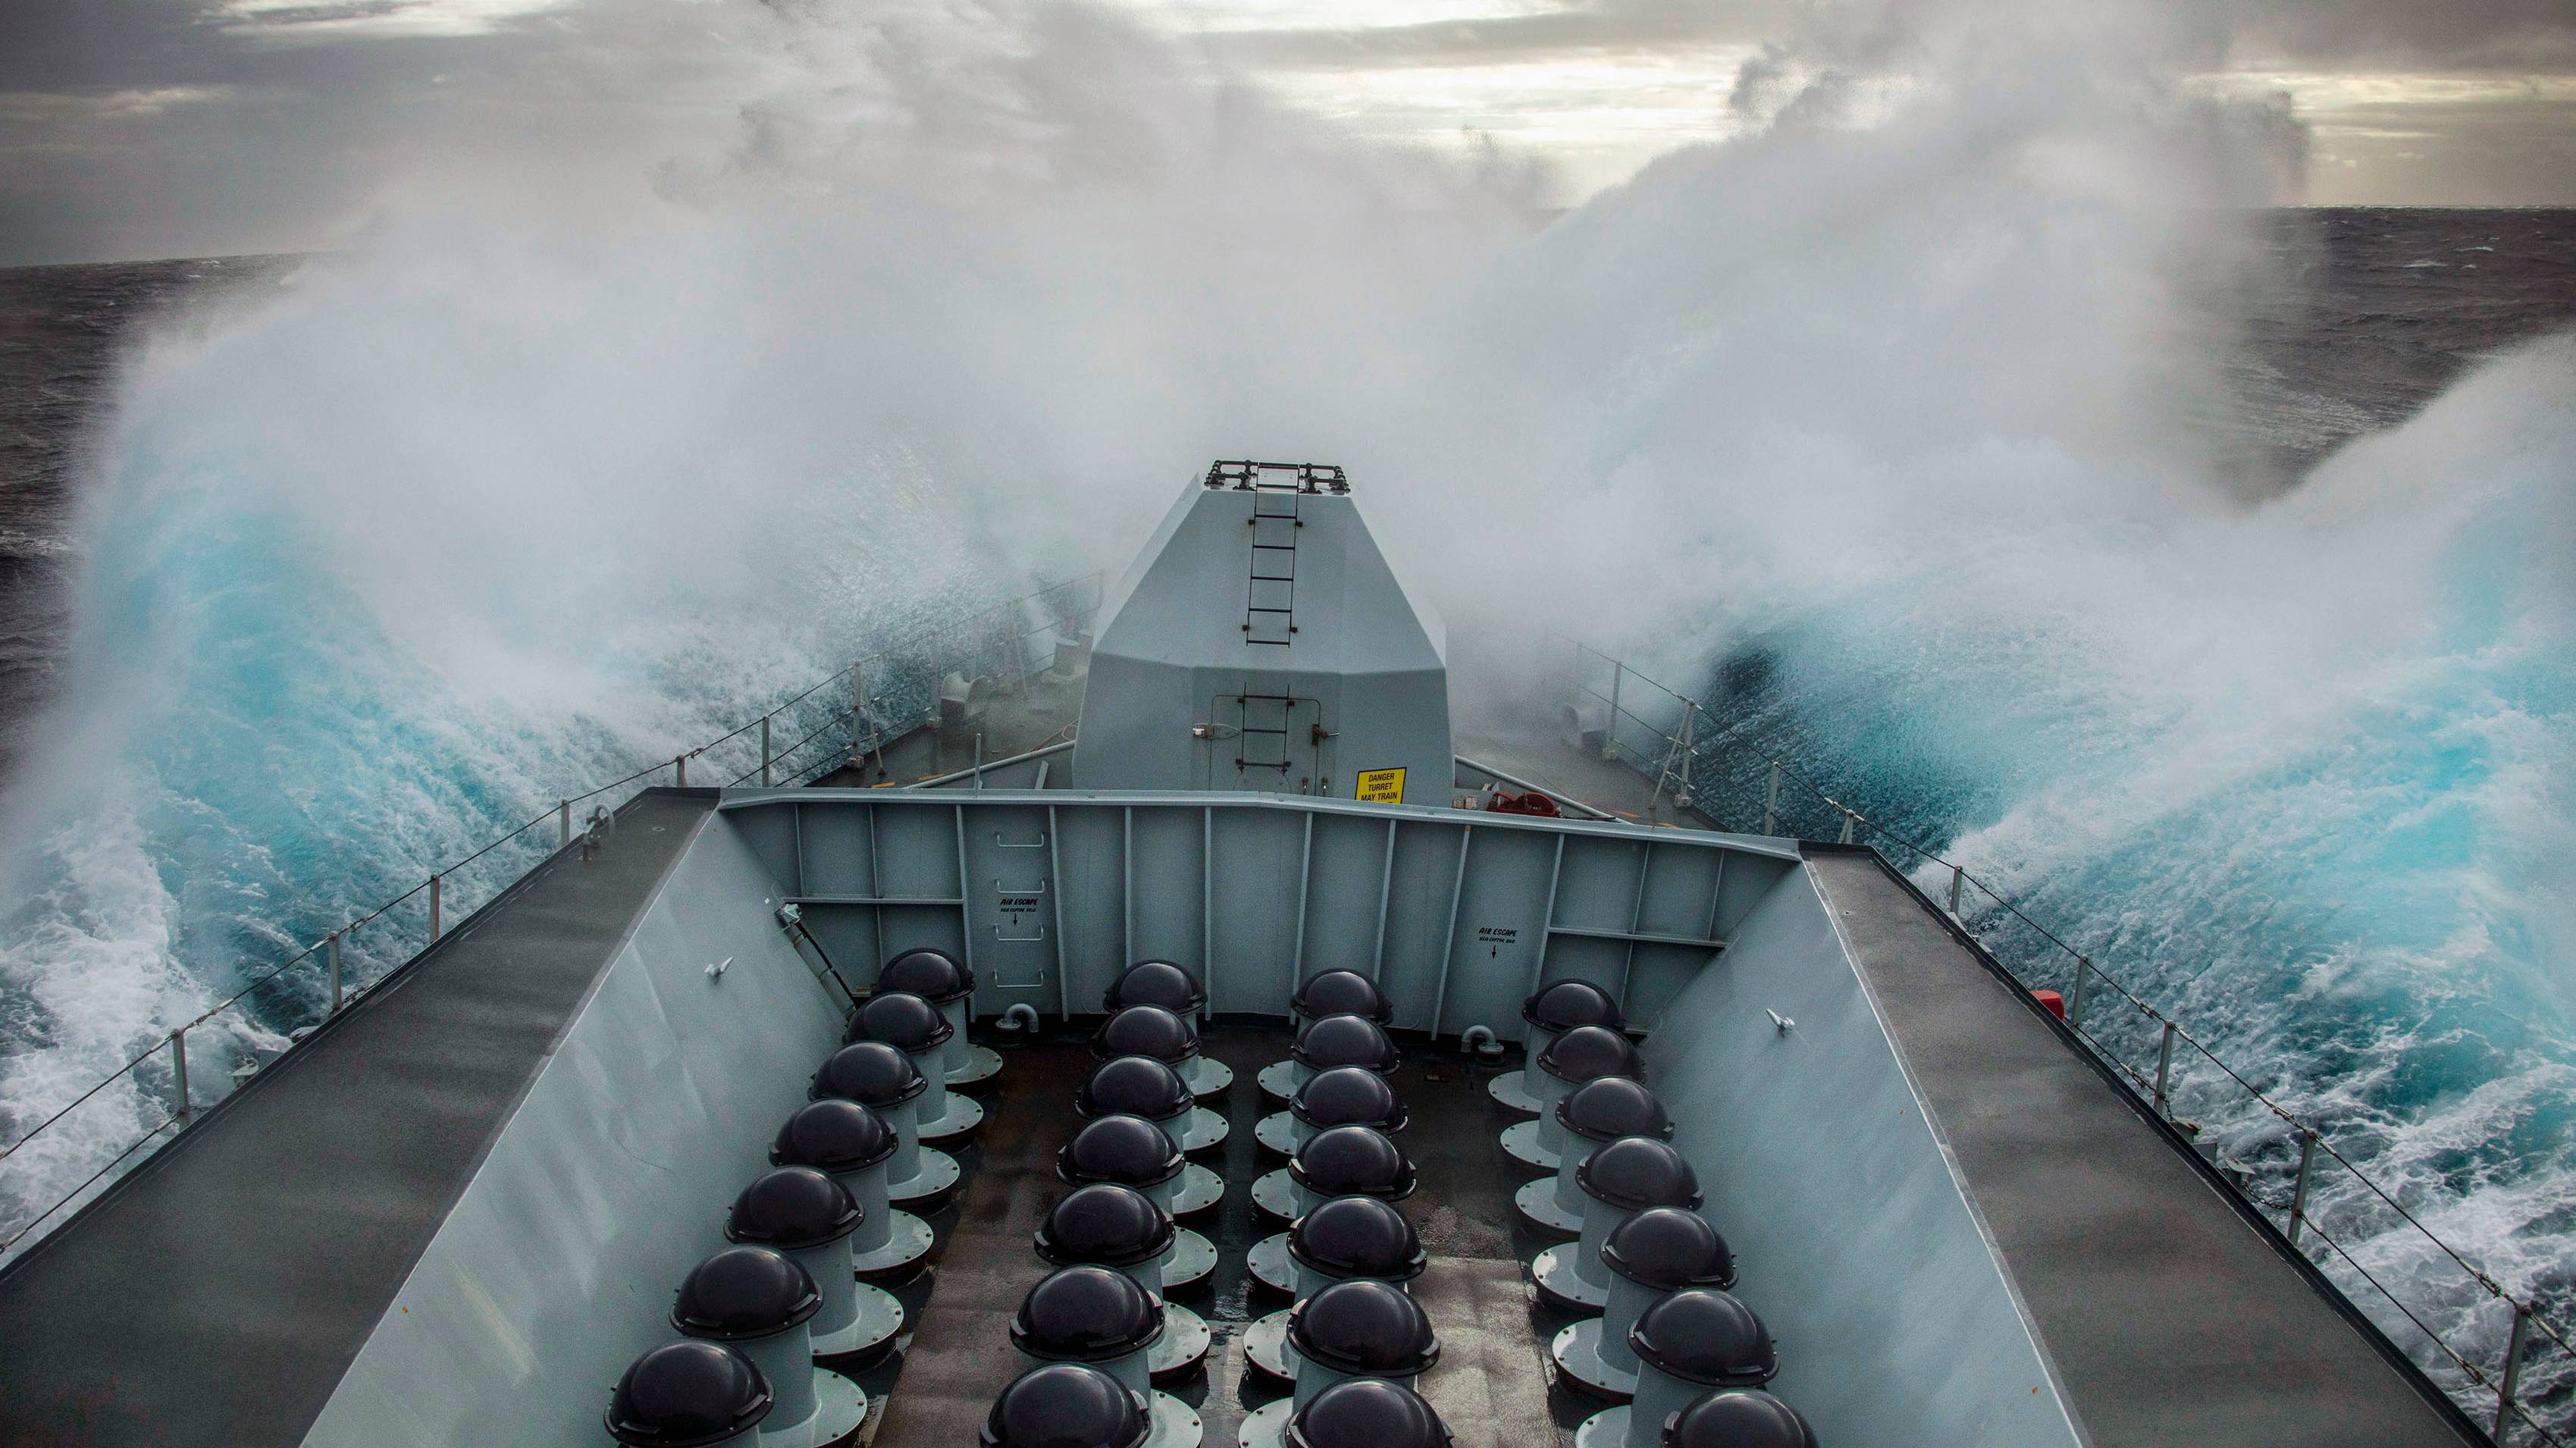 Pictured, Waves crash over HMS Lancaster's bow as she transits along Norway's coastline.

On 26th March 2021, HMS Lancaster started her transit south from Norway having been exercising with the Norwegian Frigate  THNoMS Thor Heyerdahl.

During the transit south down the the Norwegian coastline she encountered high seas which made for some impressive wave formations crashing over her bow.

The Type 23 Frigate from HMNB Portsmouth will conduct a short stint of maritime security patrols around the UK coastline before taking over duties as the Fleet Ready Escort Ship.

All the ships in the Type 23 class are named after Dukes, in this case, the Duke of Lancaster.

HMS Lancaster recently had a major refit and some of her new equipment includes a new Artisan 3D radar and vastly-improved air-defence capabilities provided by Sea Ceptor, replacing Sea Wolf missiles which only possess about half the Sea Ceptors range.

The hull was cleaned and coated with anti-fouling paint to prevent marine life attaching itself, the main 4.5in gun serviced, engines and machinery overhauled, new systems installed, and the bridge, messes and other communal areas revamped.